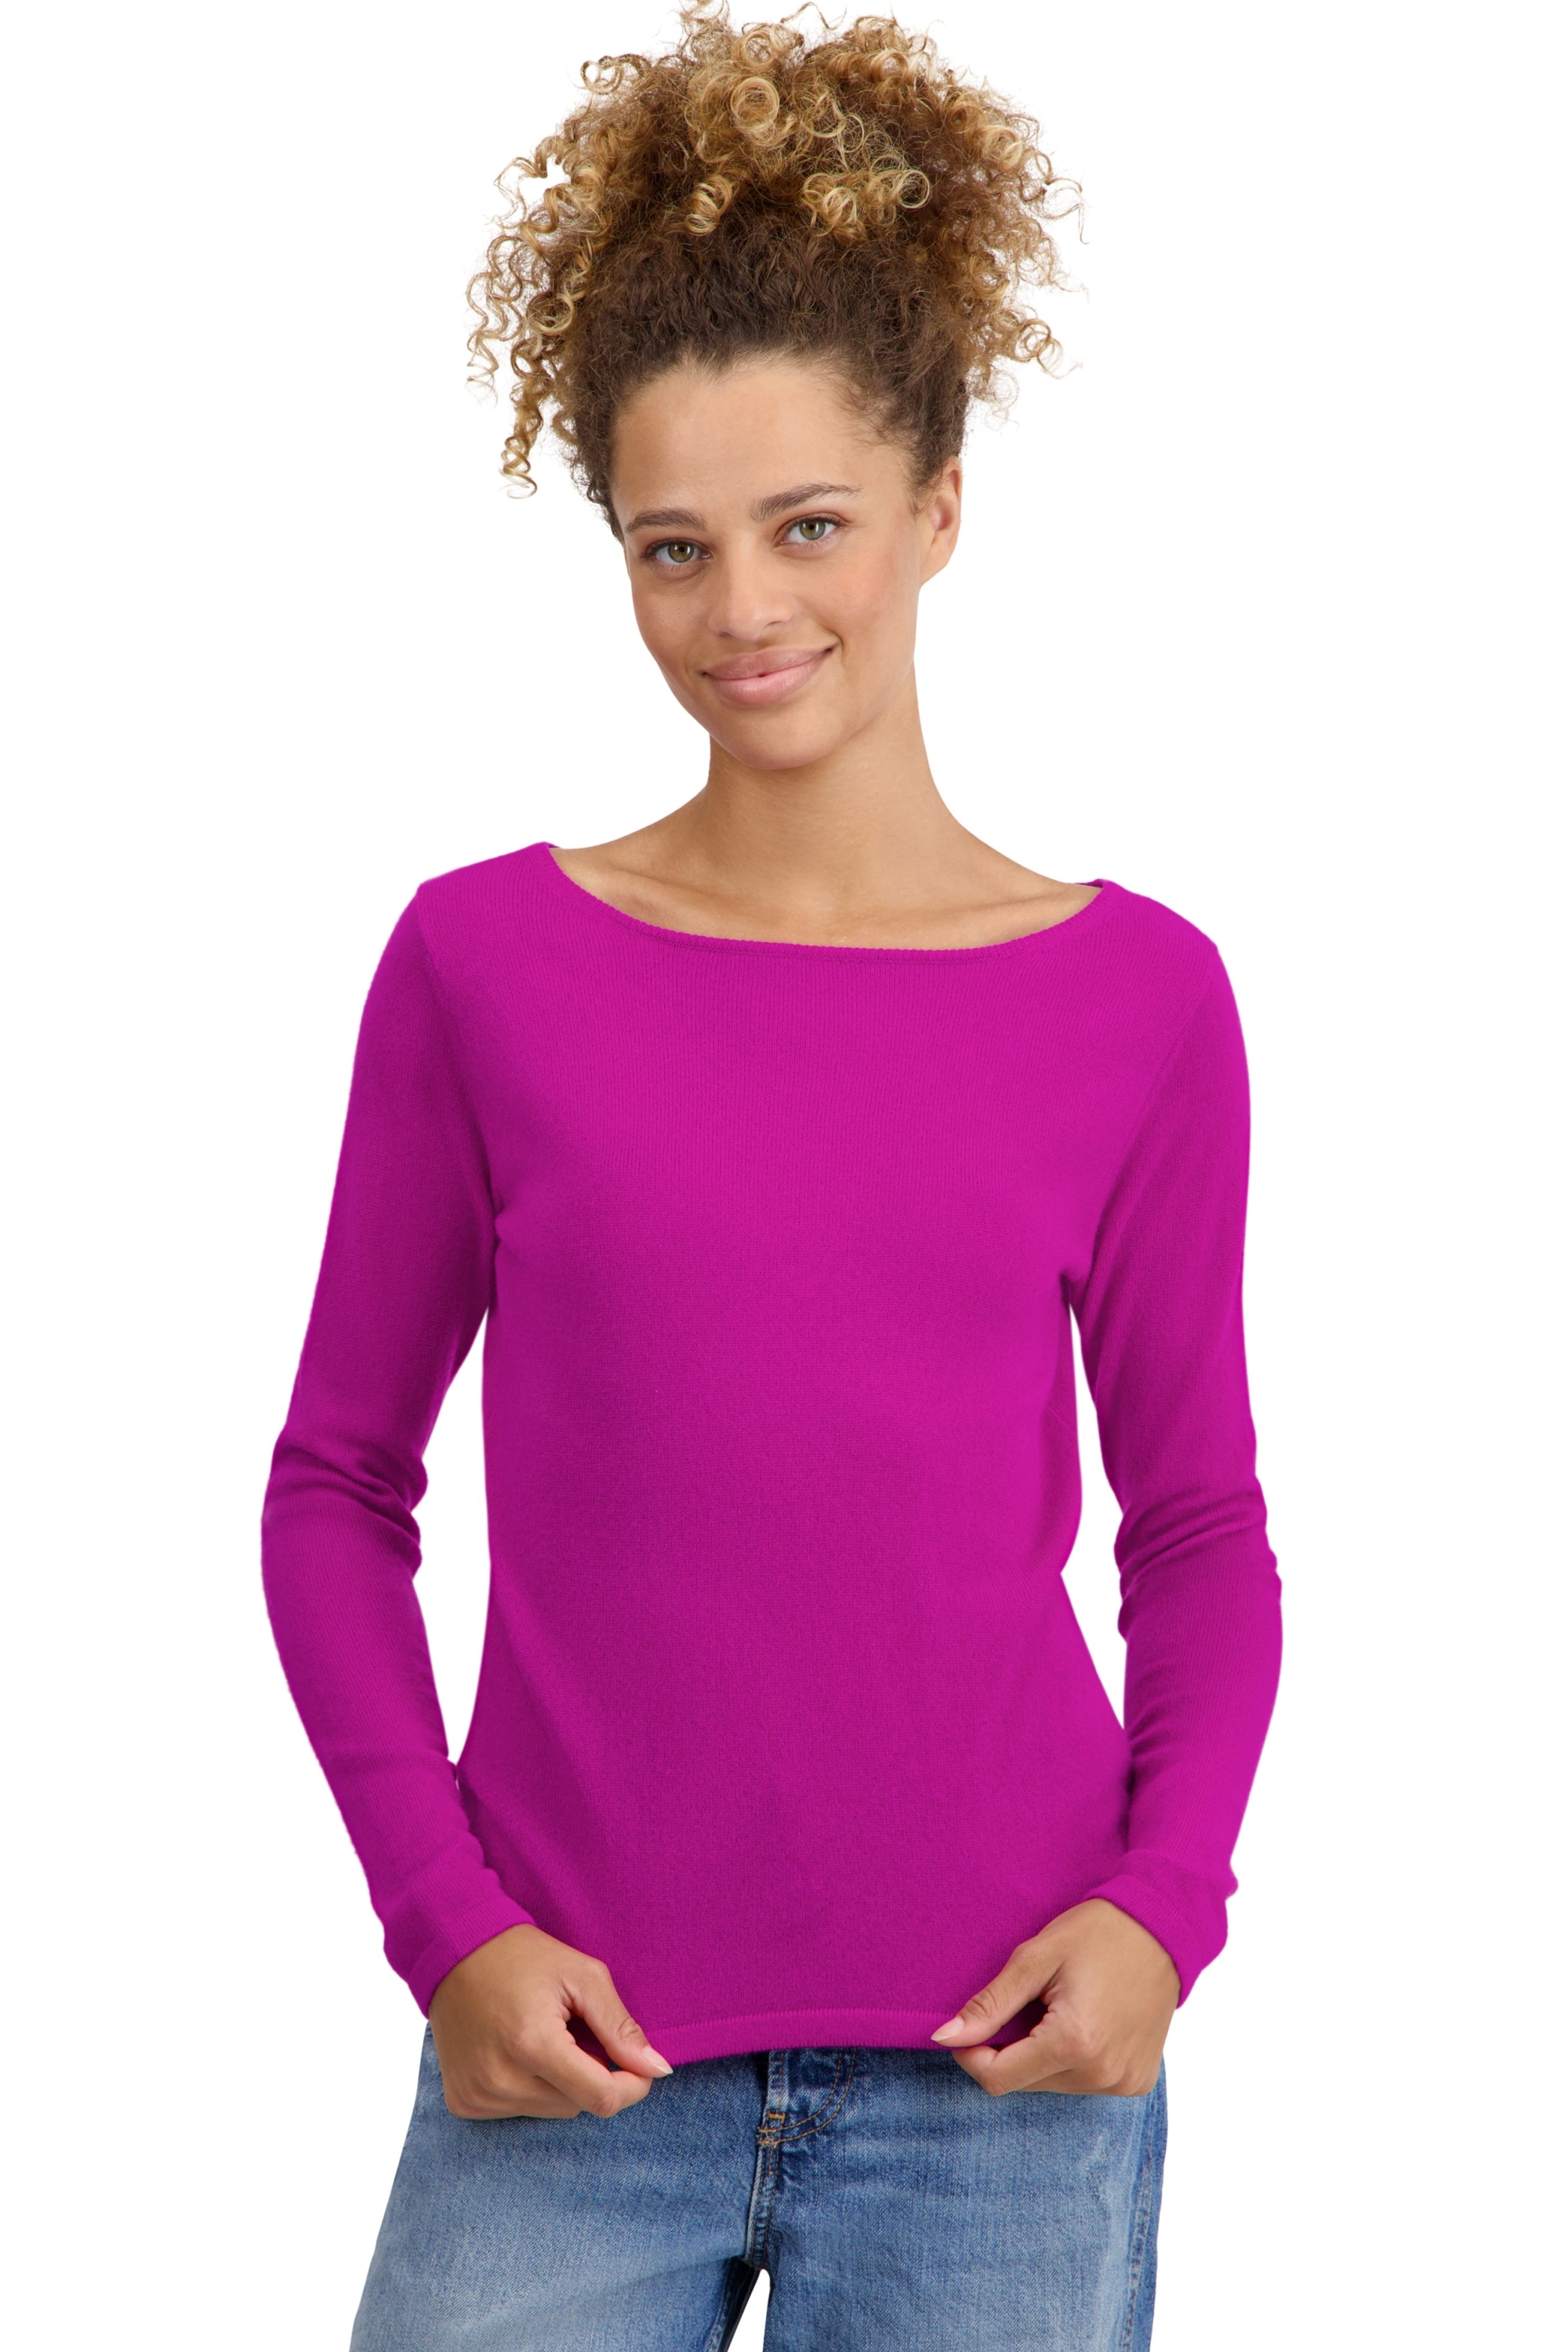 Cashmere ladies tennessy first radiance s